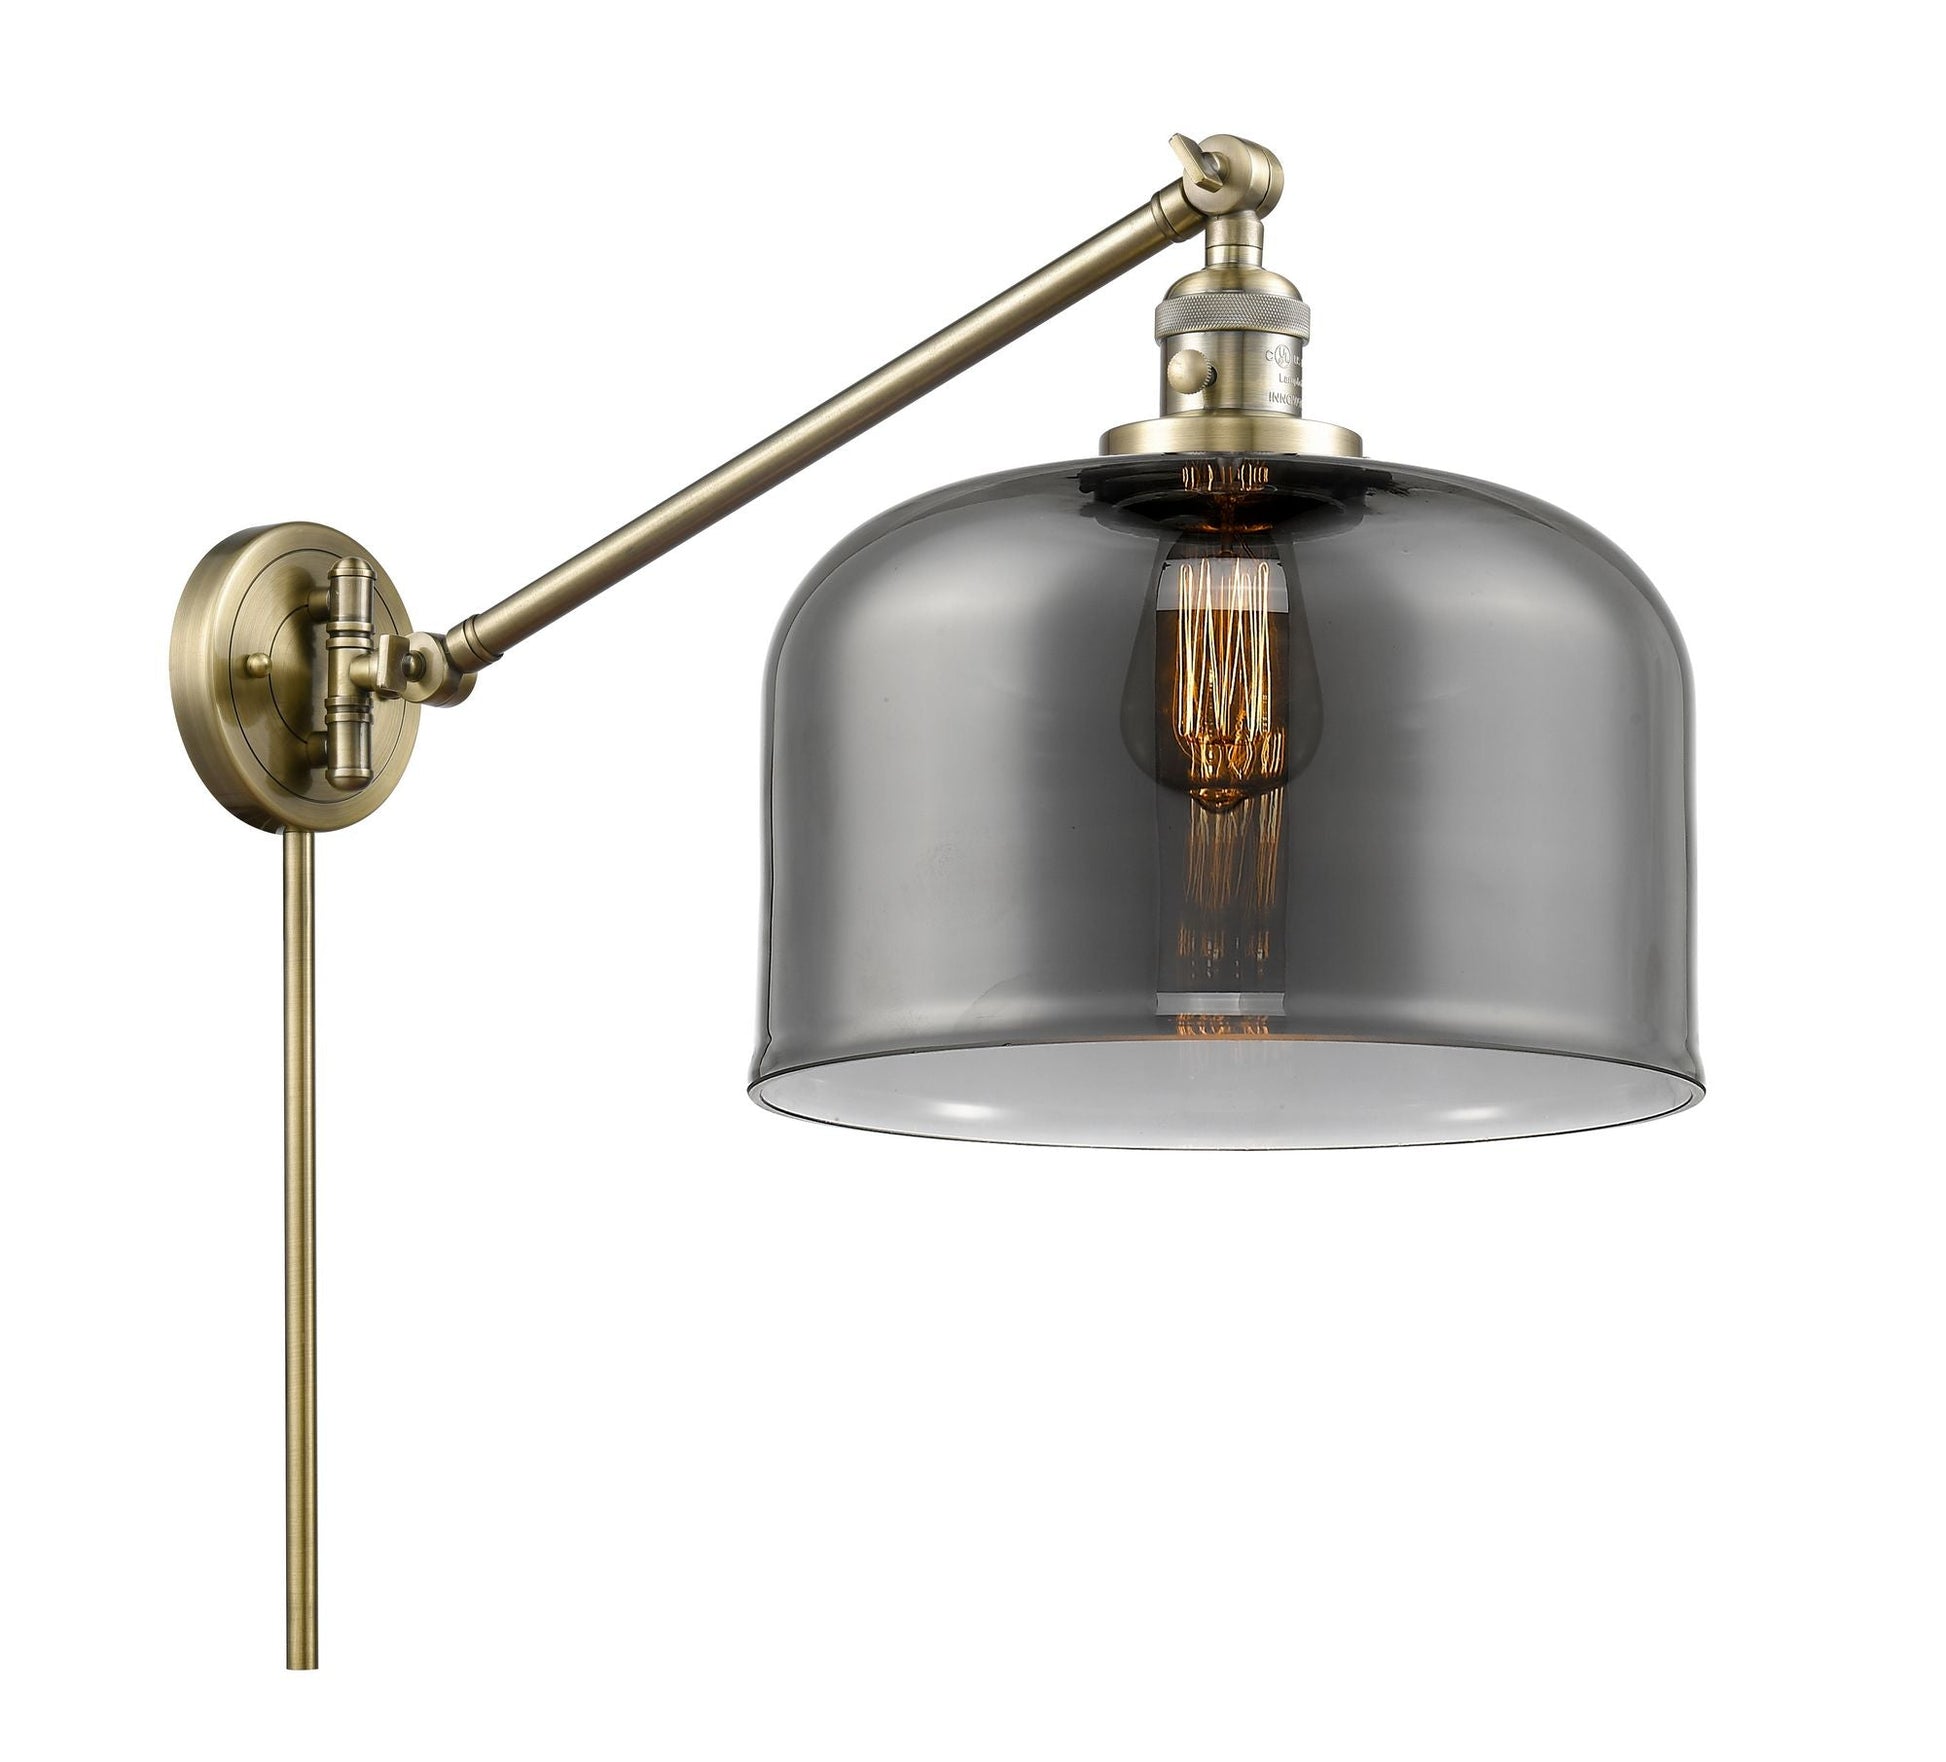 1-Light 12" Bell Swing Arm With Switch - Bell-Urn Plated Smoke Glass - Choice of Finish And Incandesent Or LED Bulbs